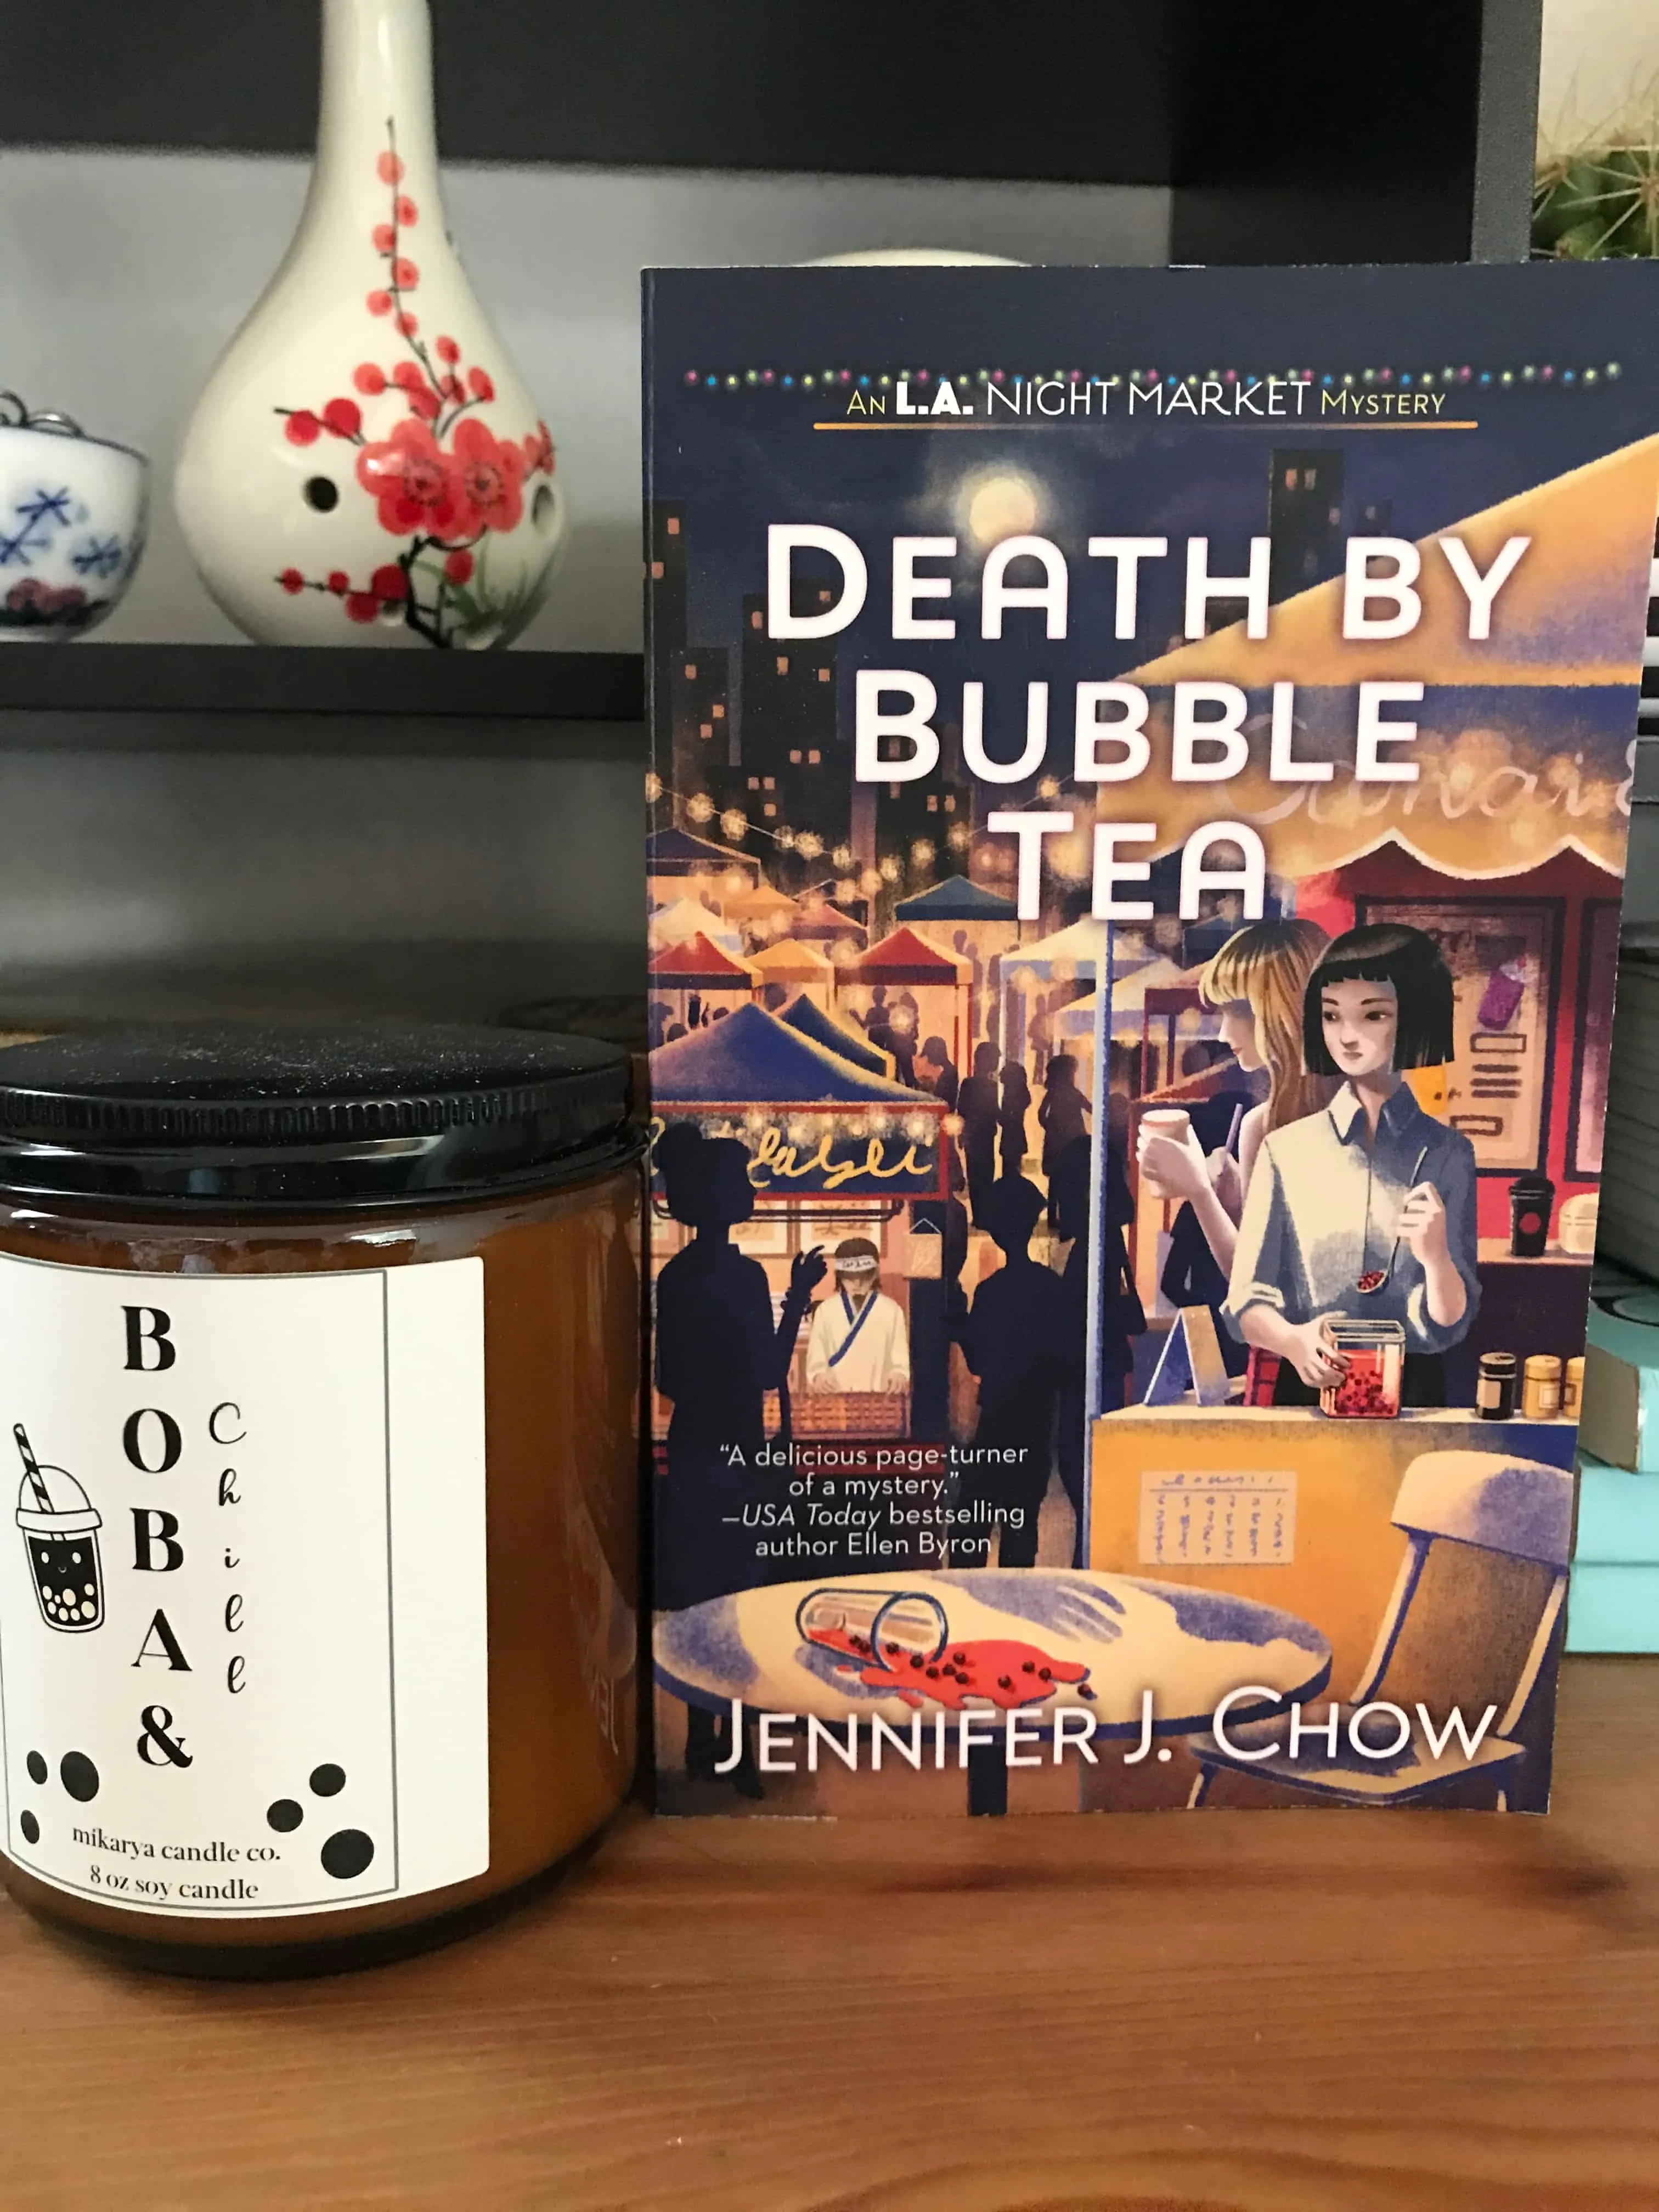 Jennifer J Chow's boba candle, beside a paperback of Death By Bubble Tea.